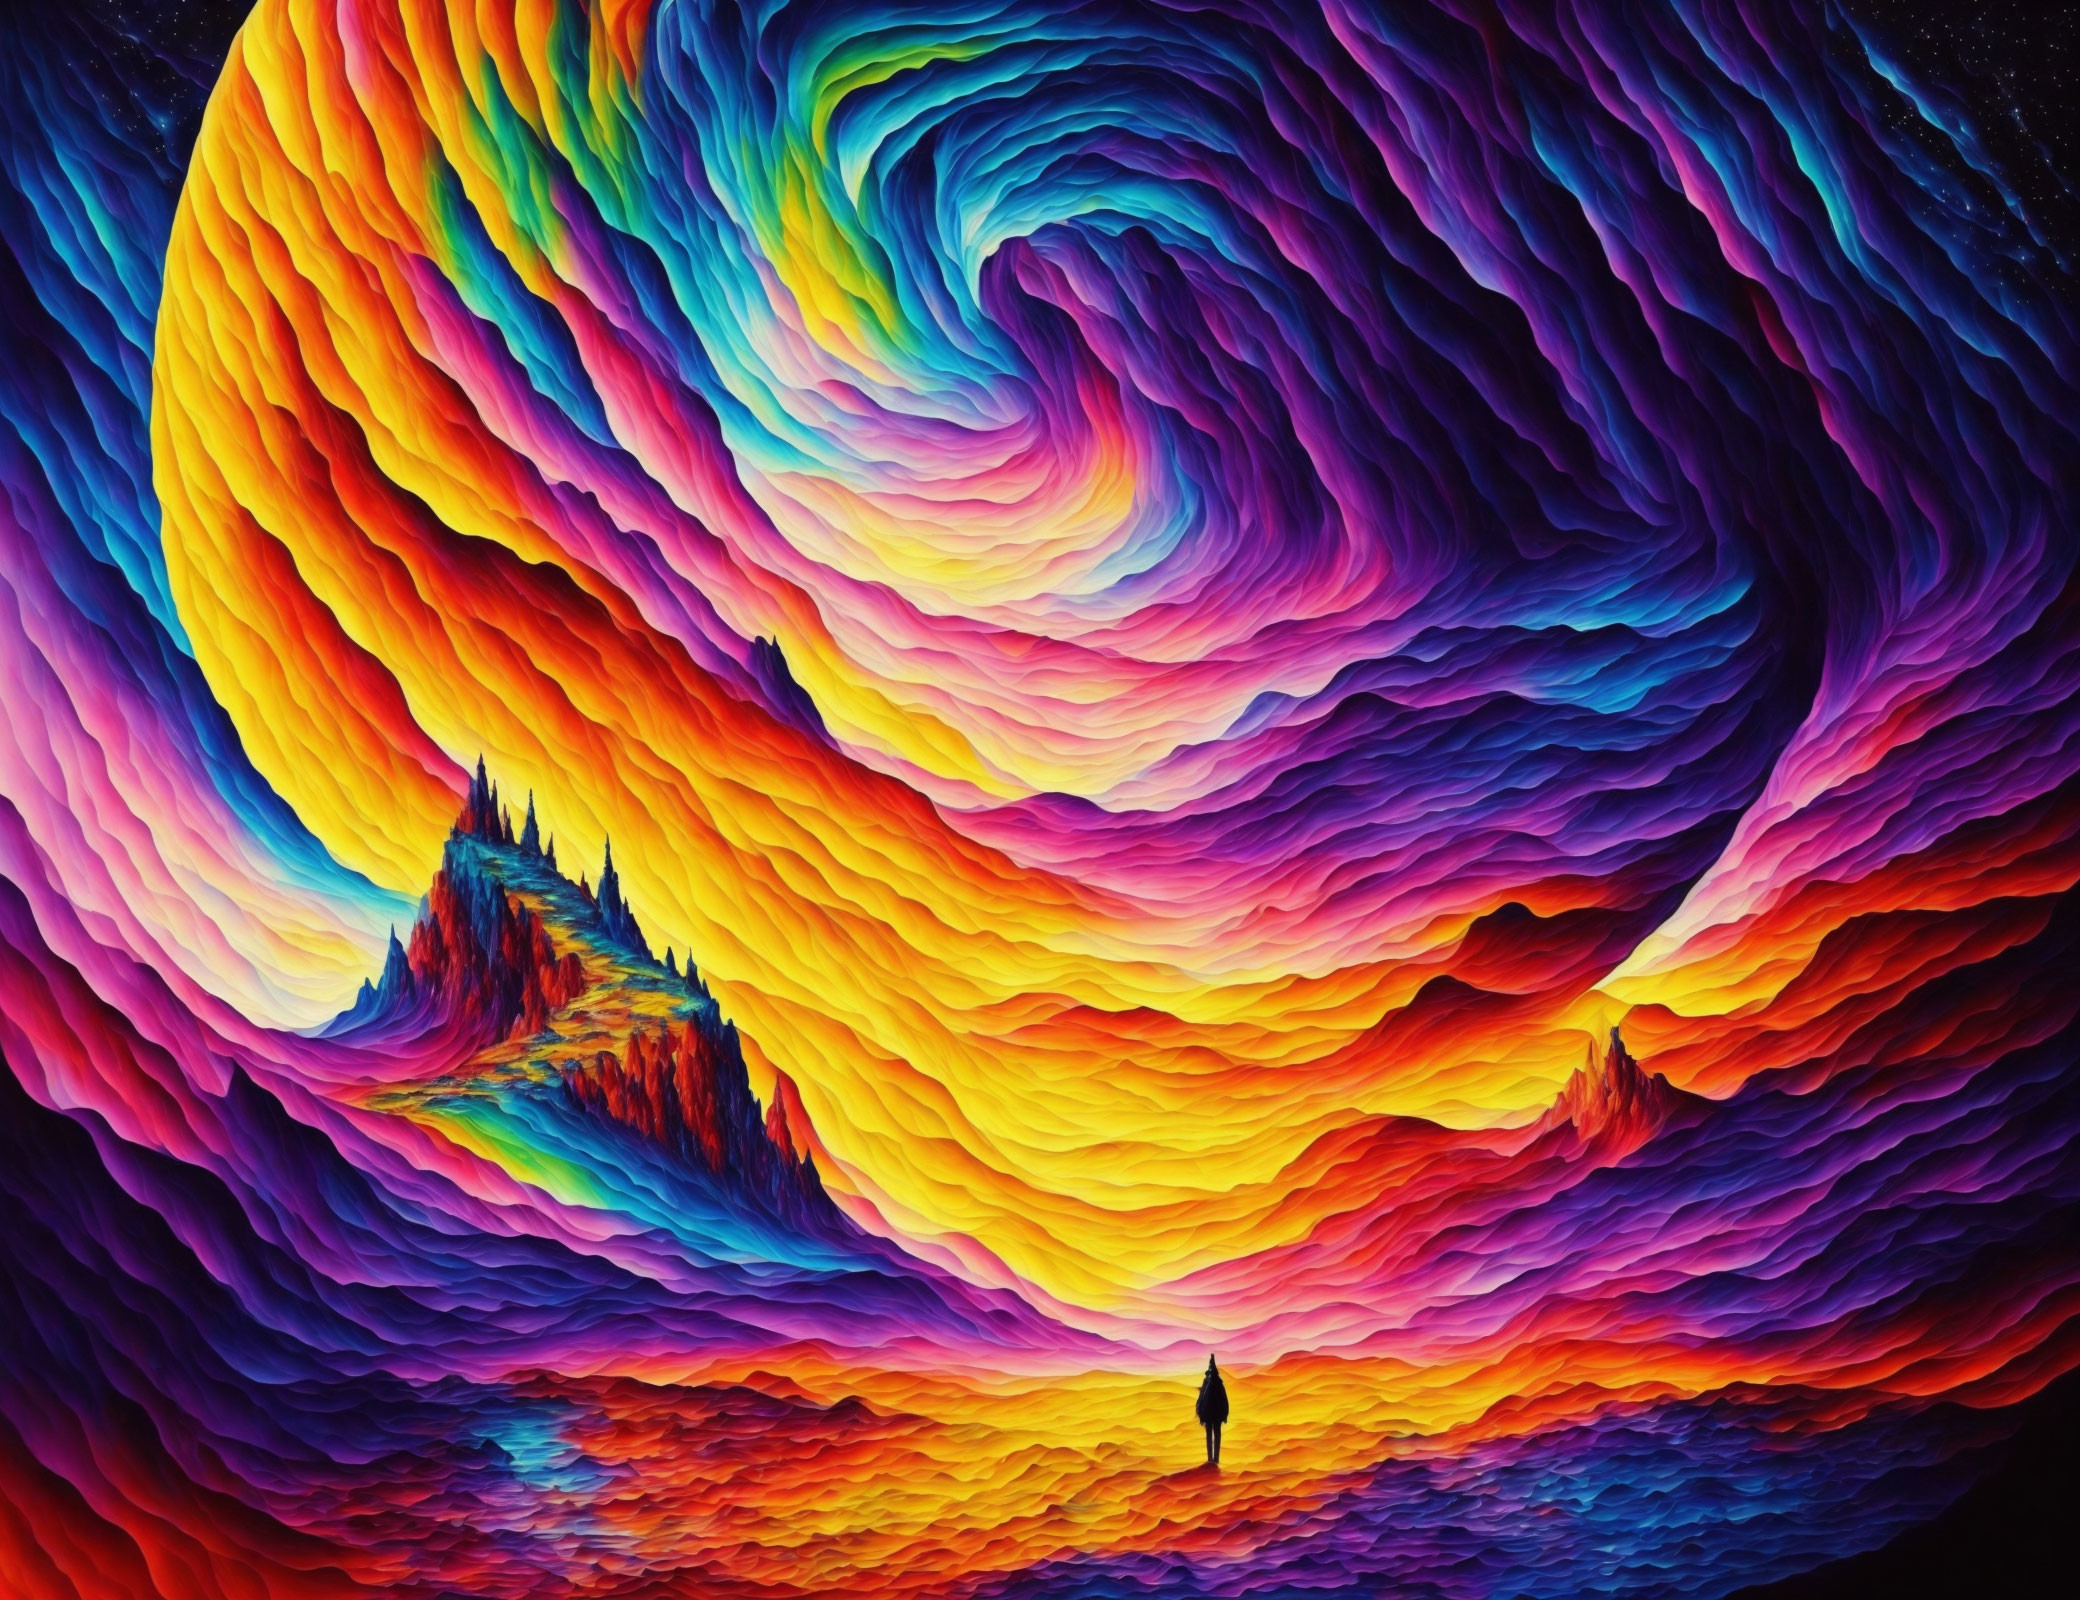 Colorful surreal painting: Person in front of swirling, bright waves over dark landscape